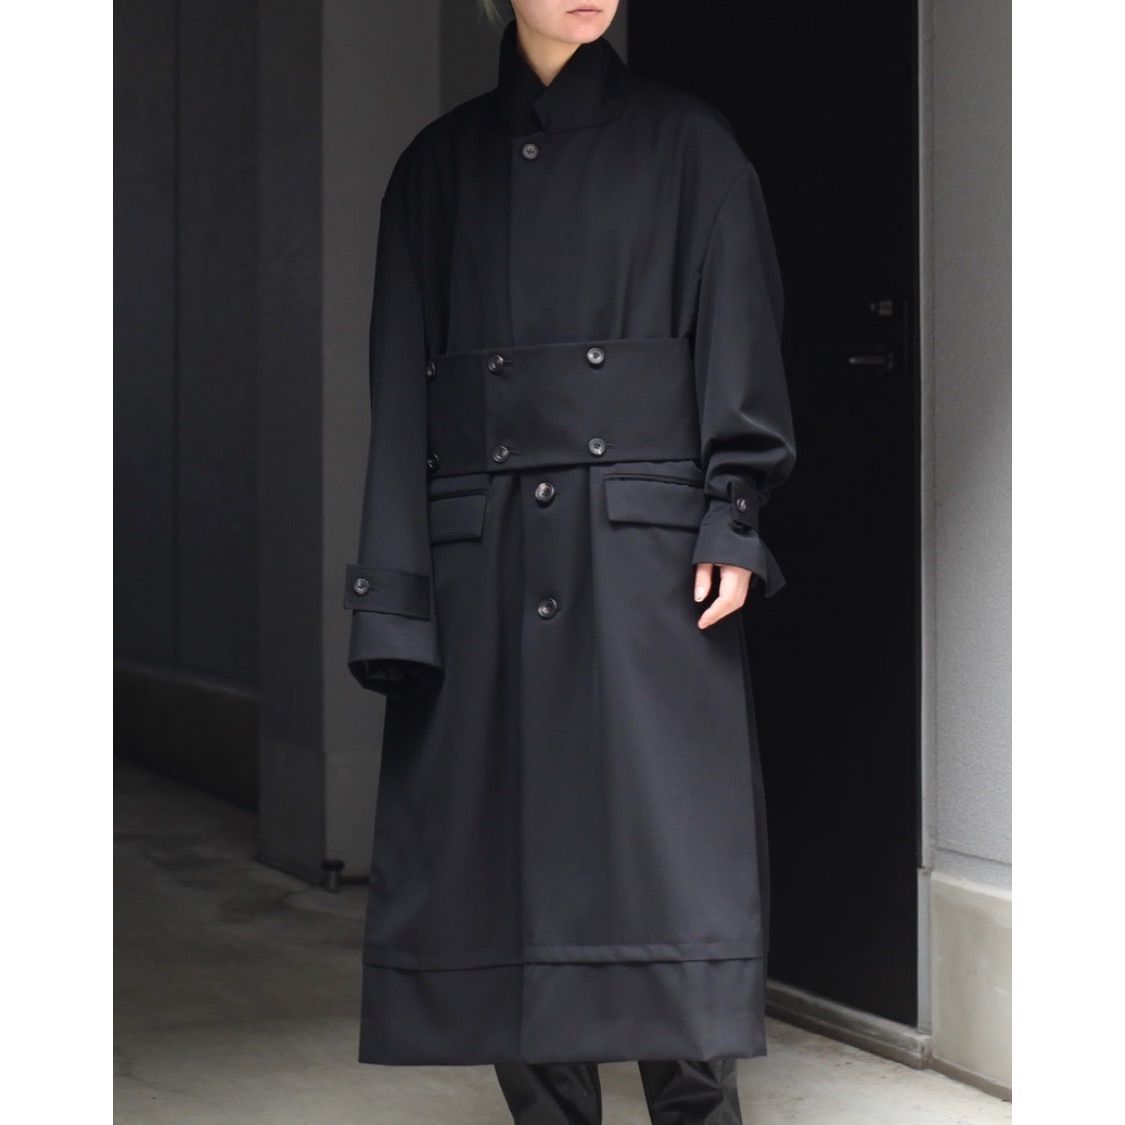 stein【stein】New Structure Chester Coat【21ss】 - チェスターコート